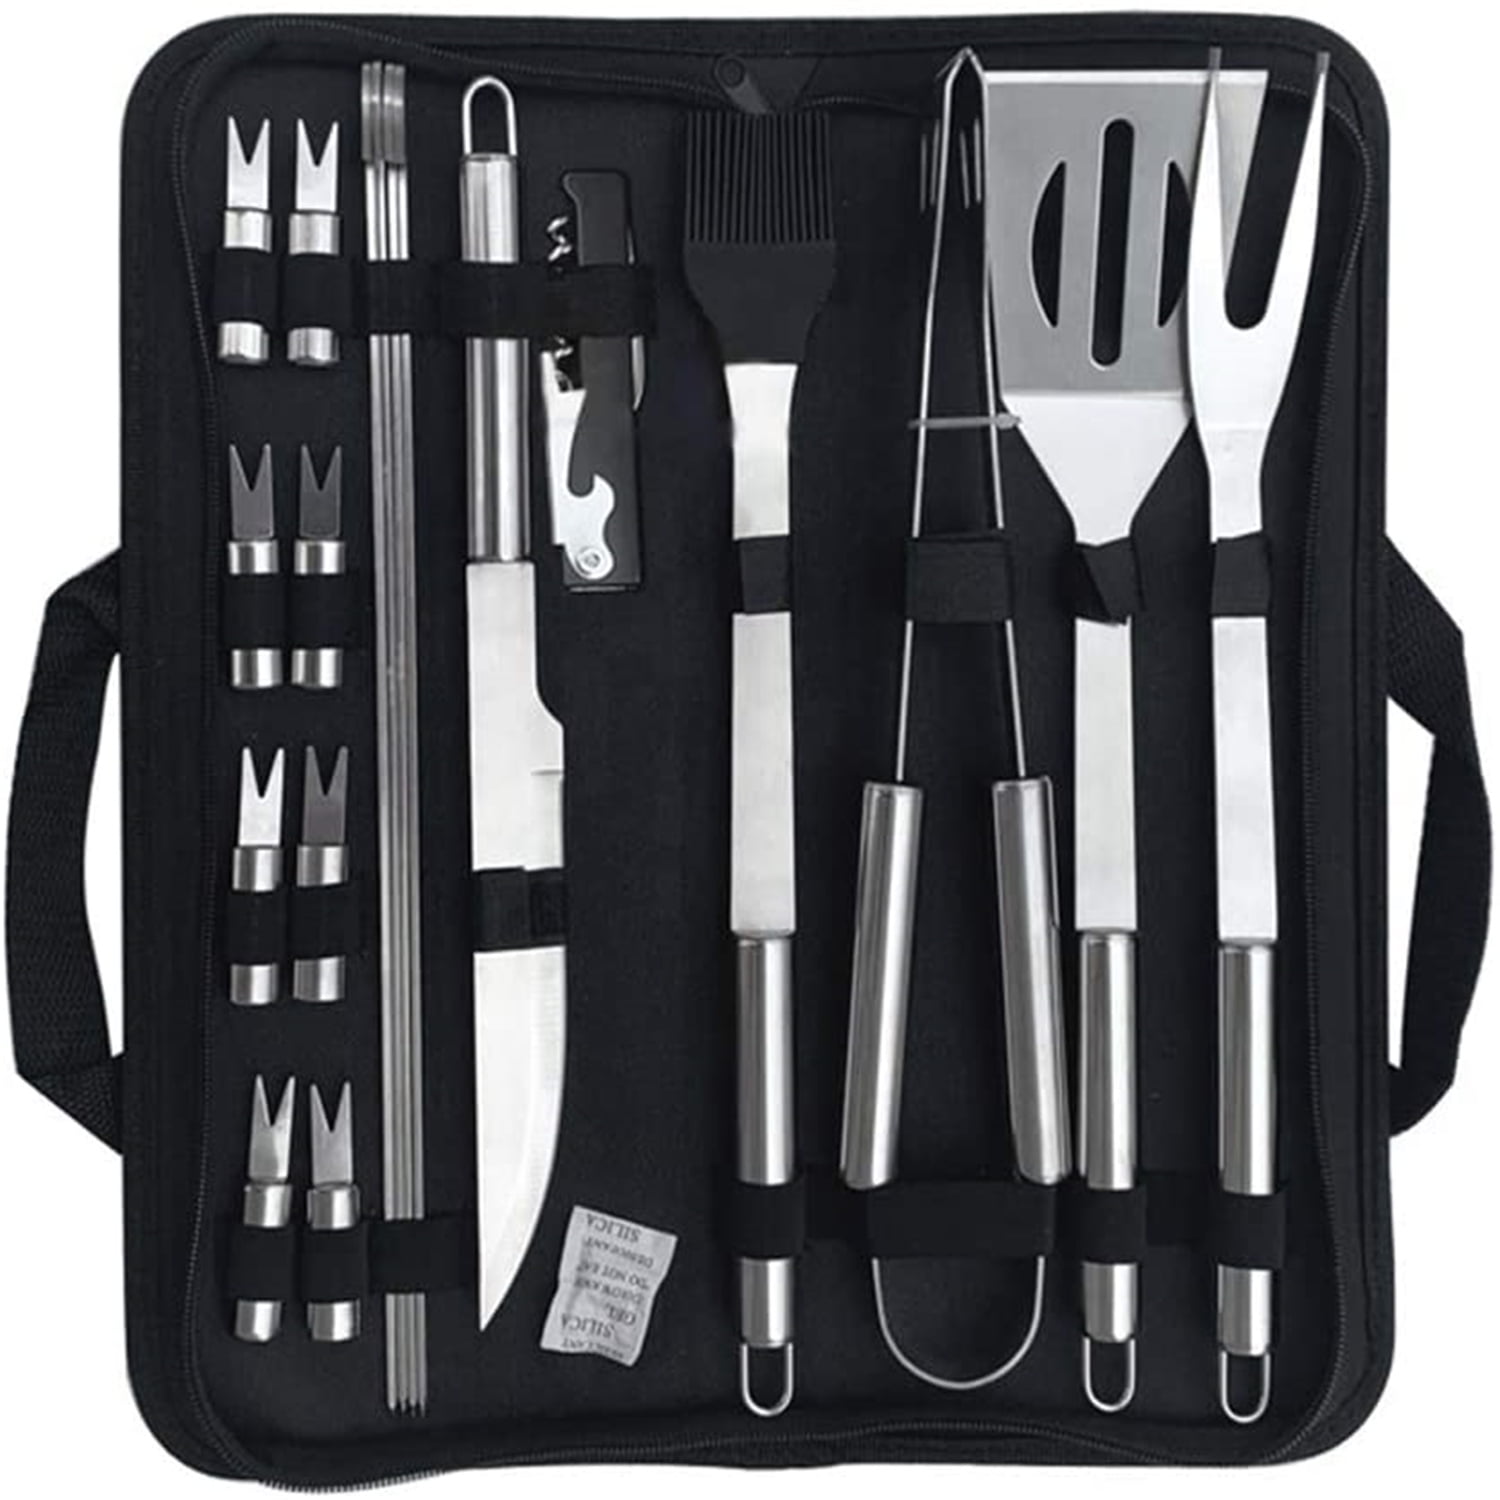 Number-one 18 PCS BBQ Grill Tools Set Barbecue Grill Utensils Stainless ...